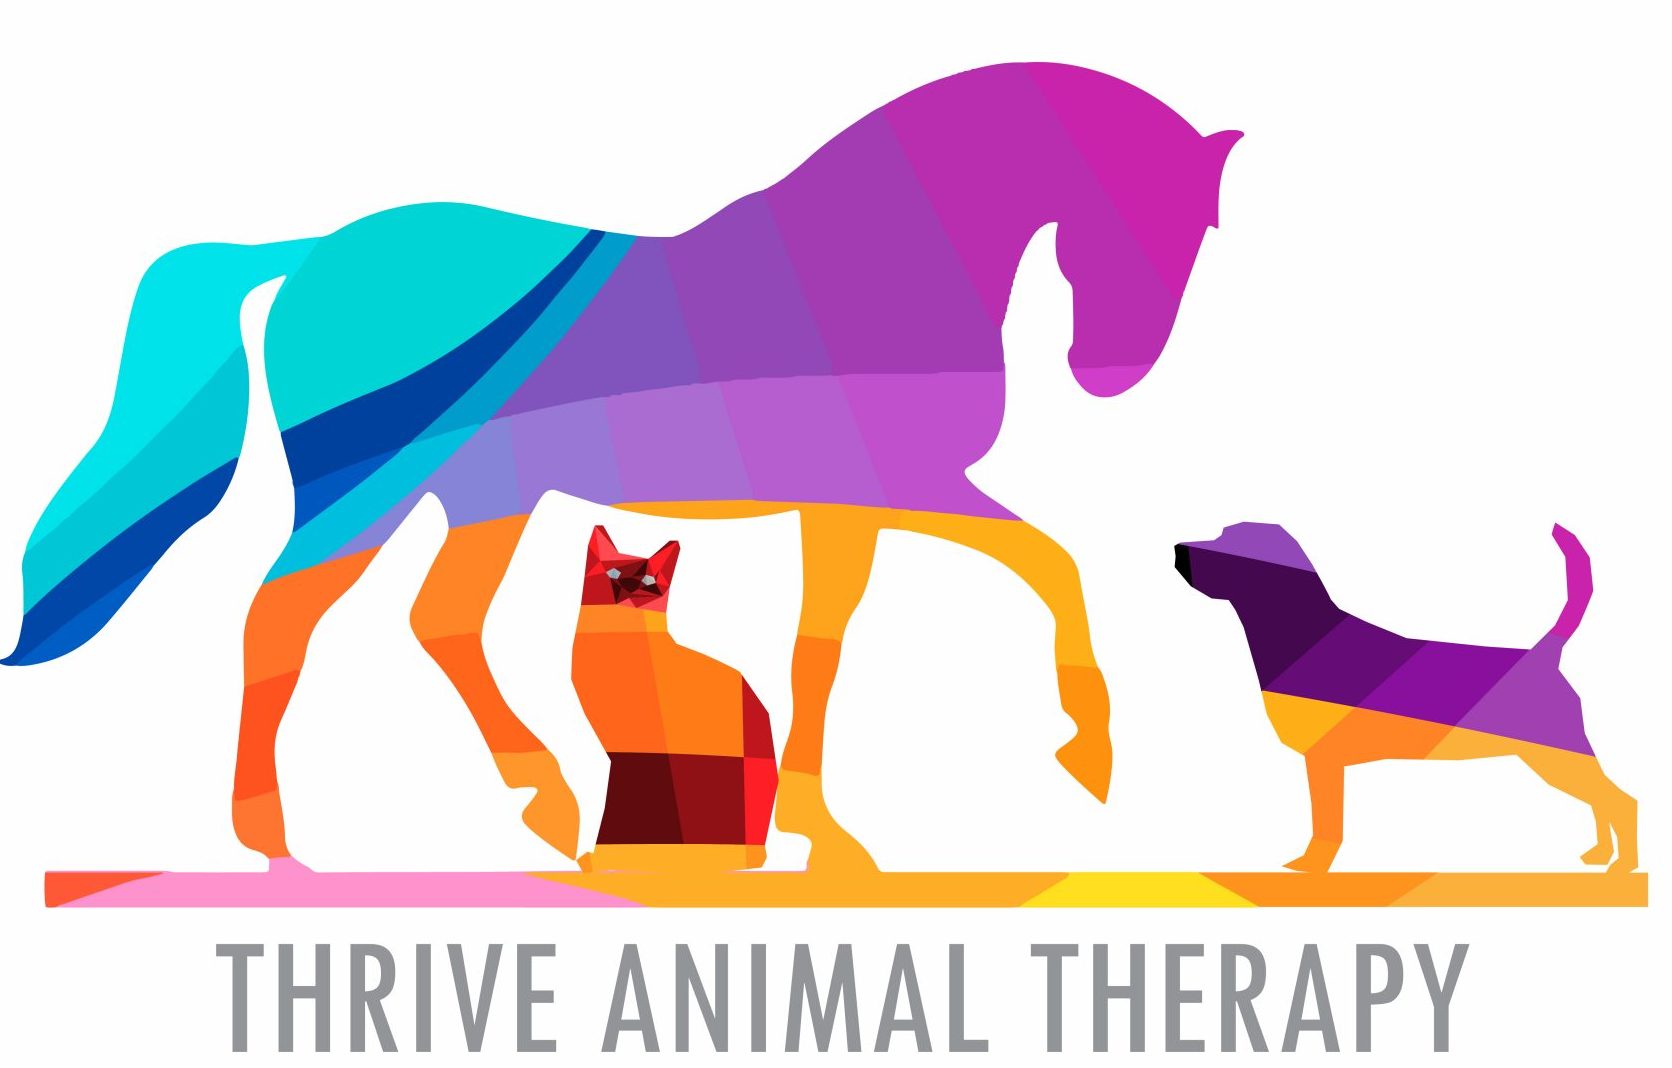 THRIVE ANIMAL THERAPY